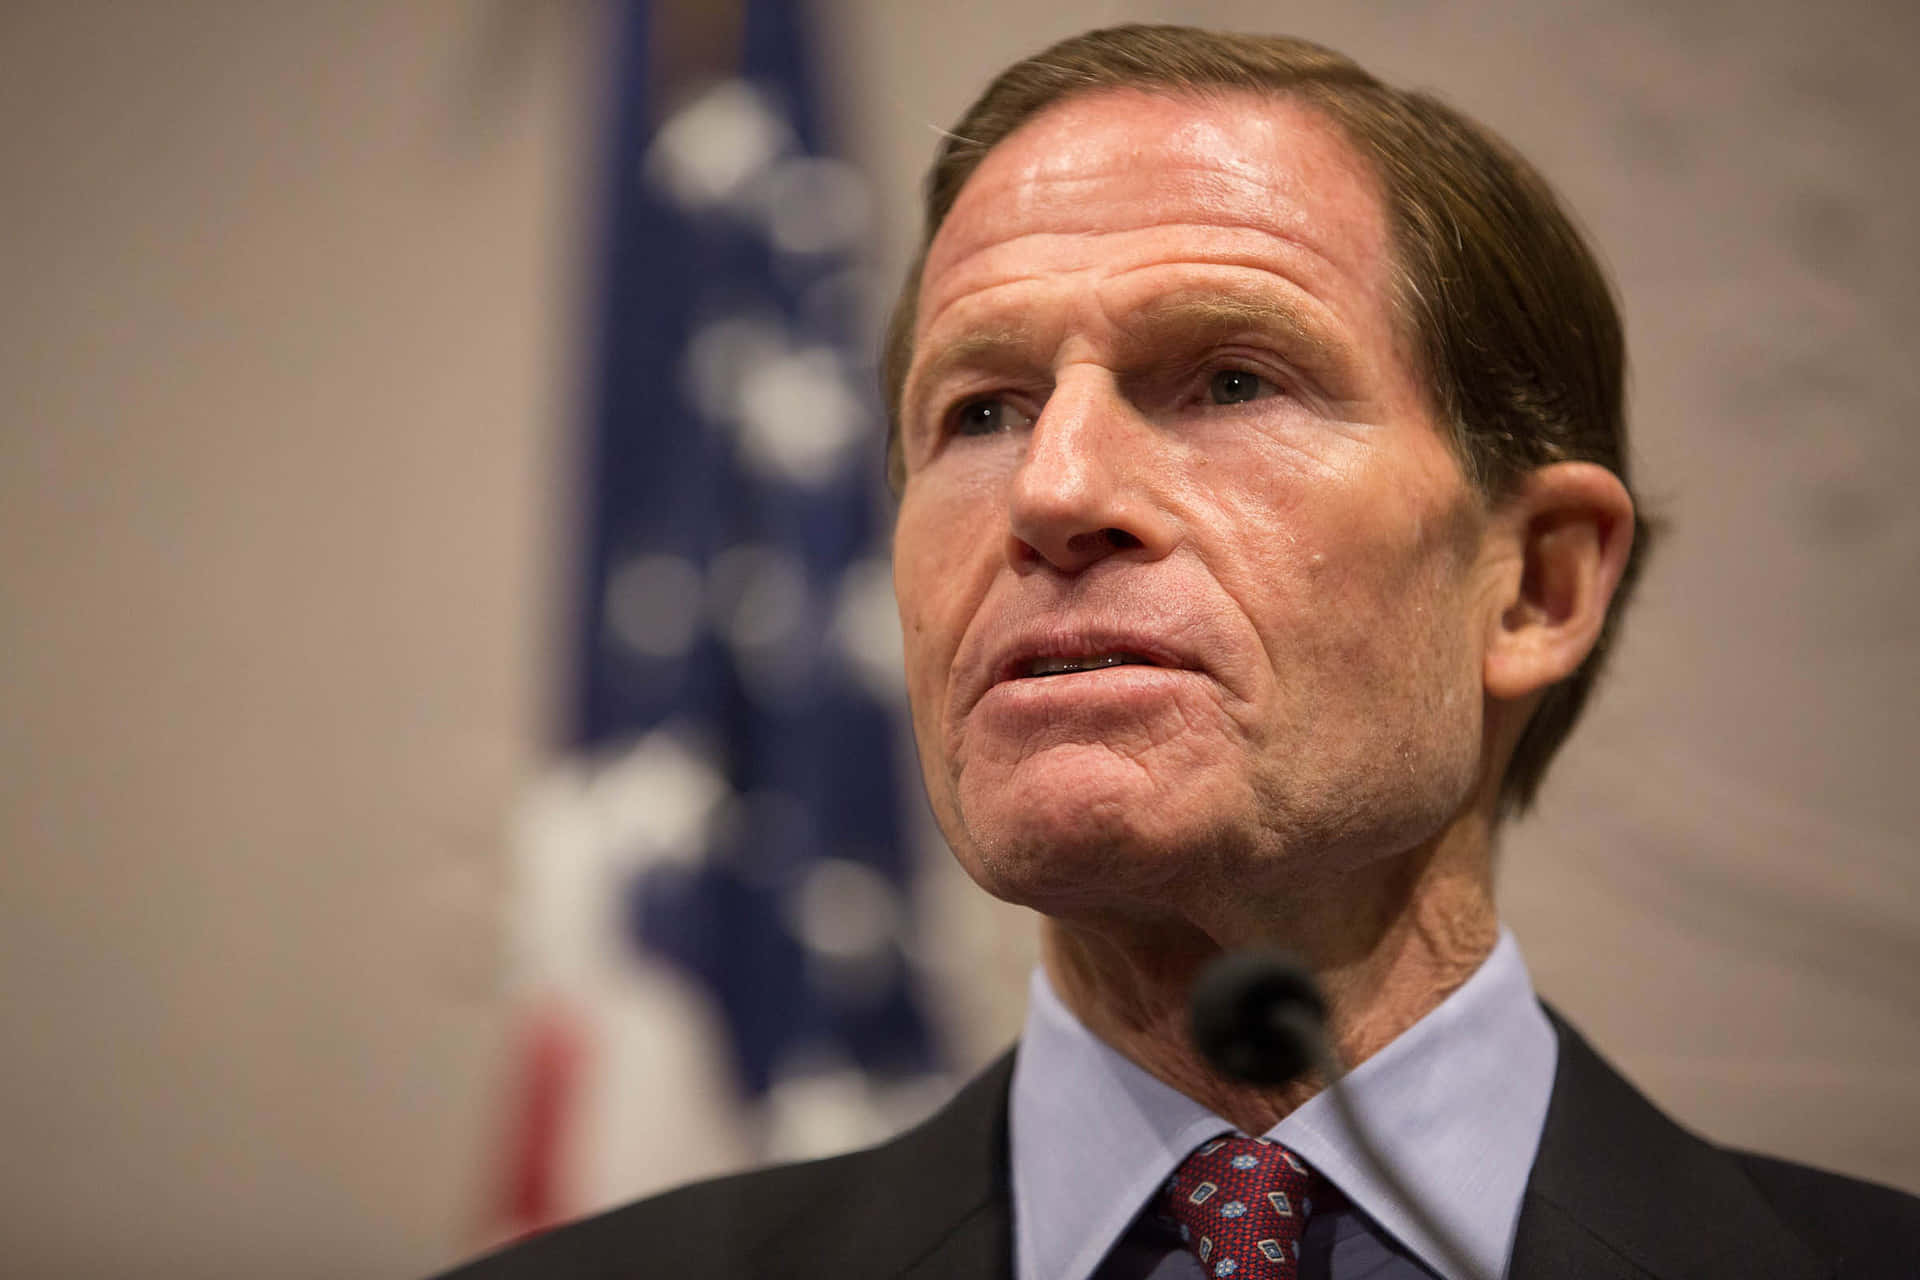 Richard Blumenthal In Front Of The American Flag Wallpaper